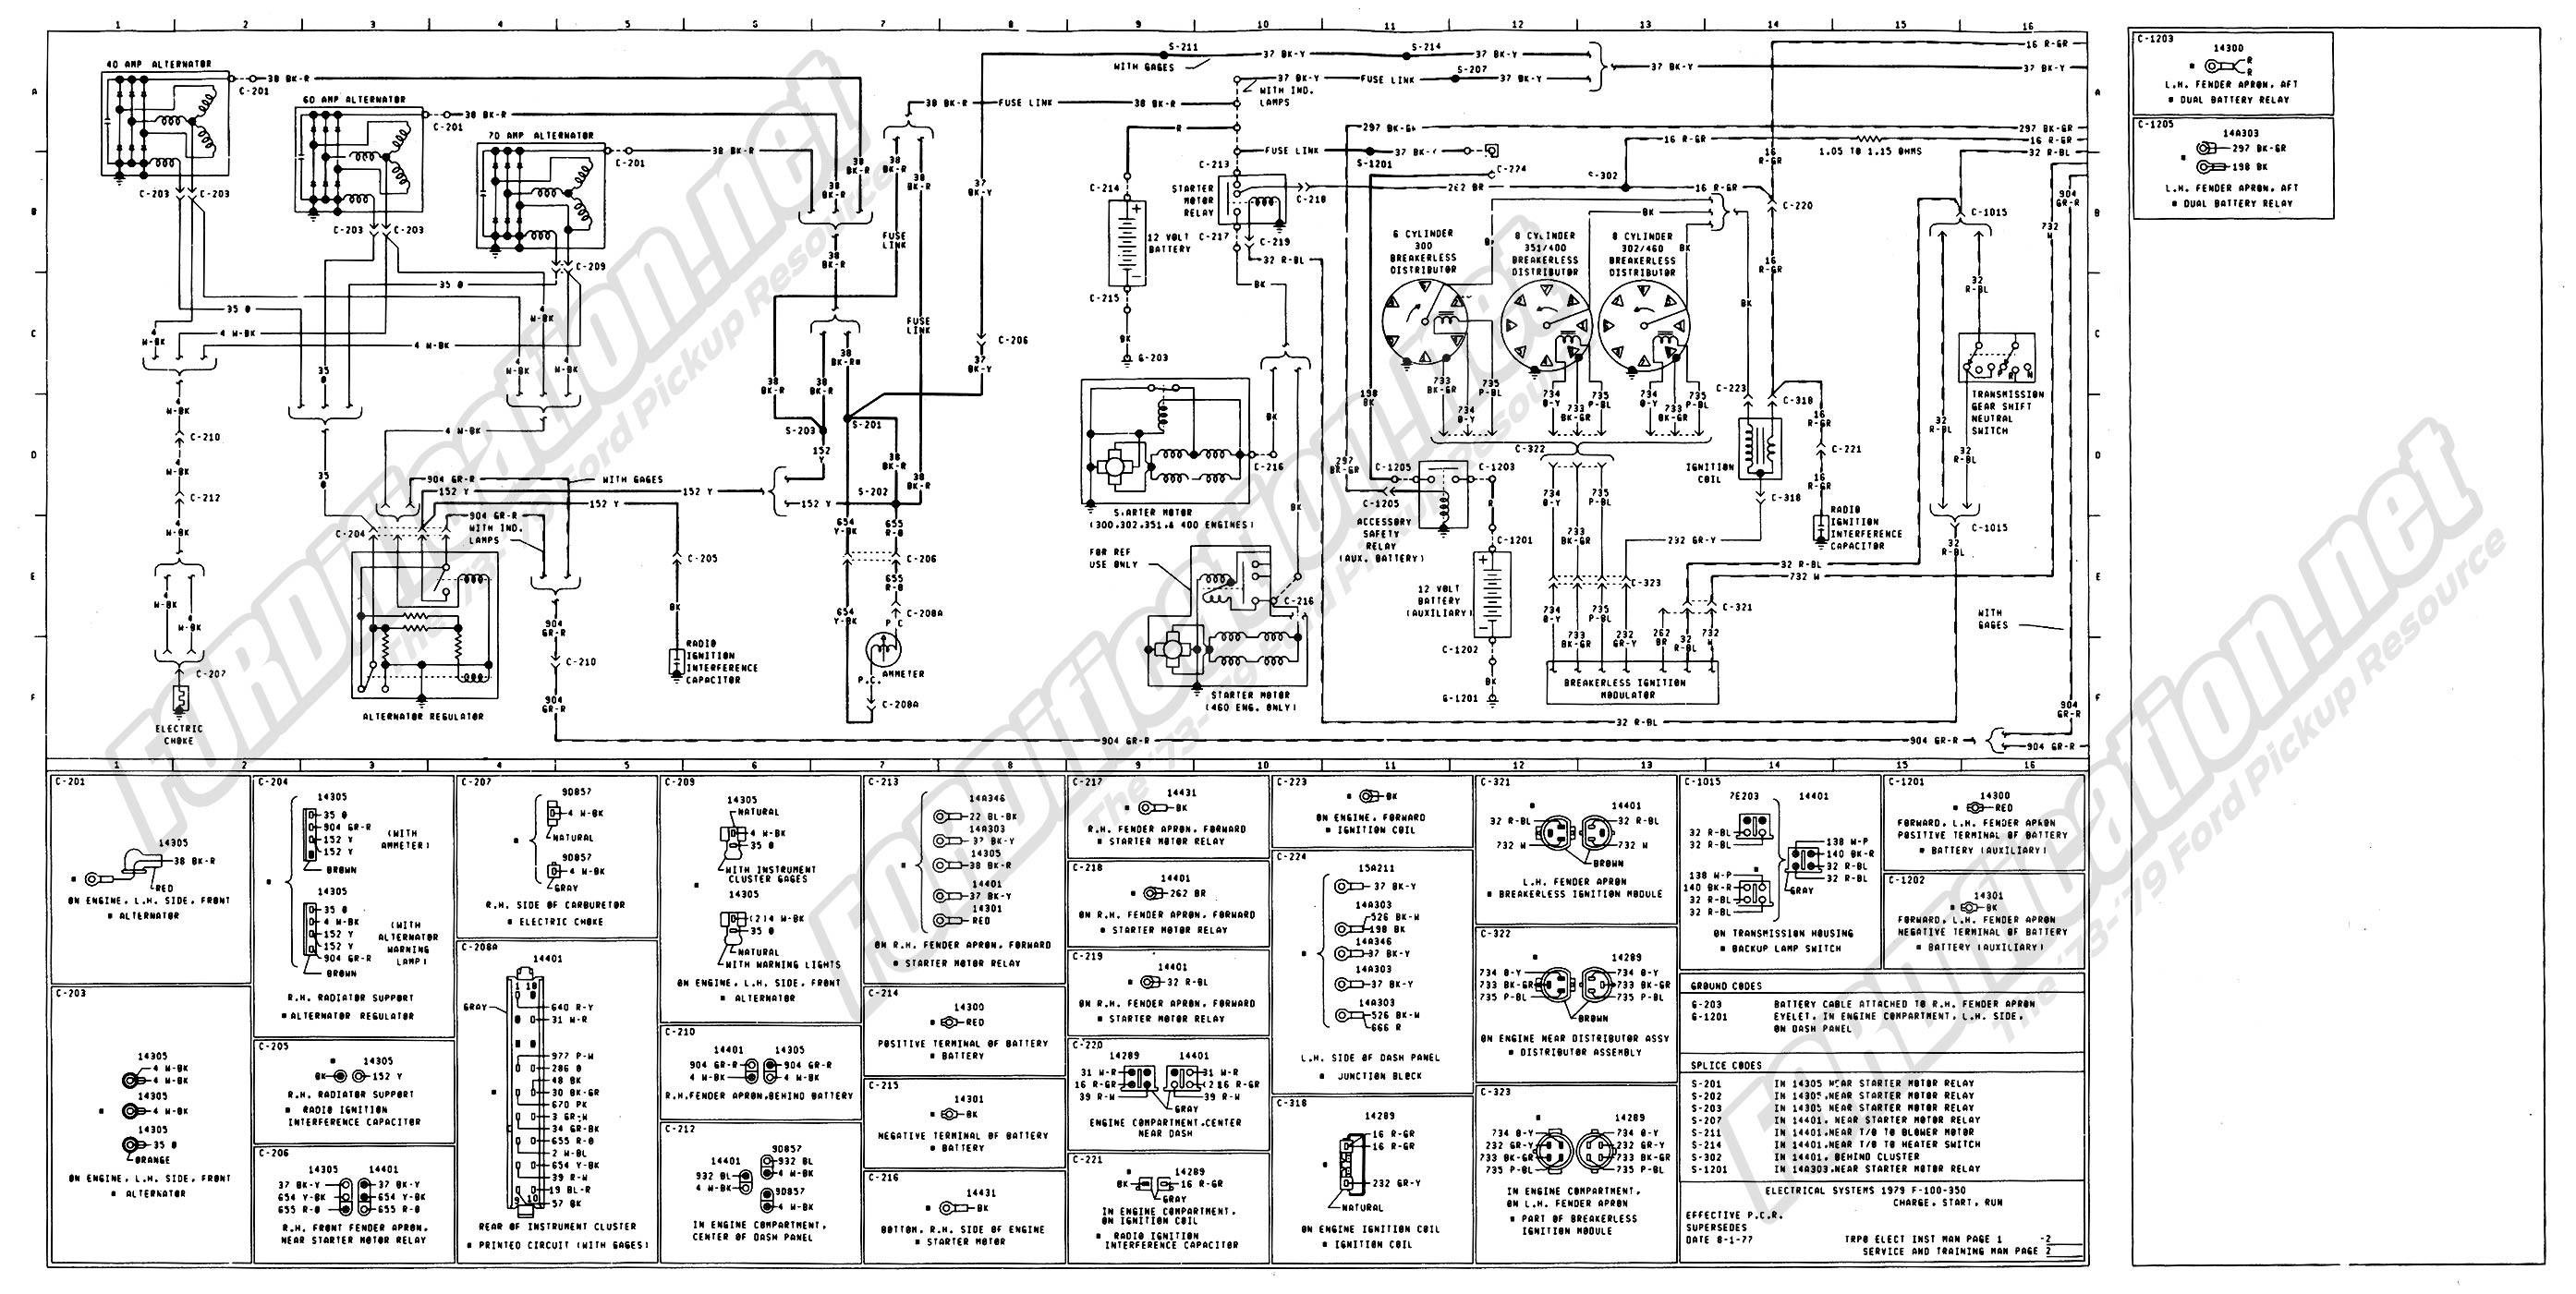 Ford F150 Wiring Diagrams Inspirational 1991 E4od Od button Wiring Types 1979 ford F150